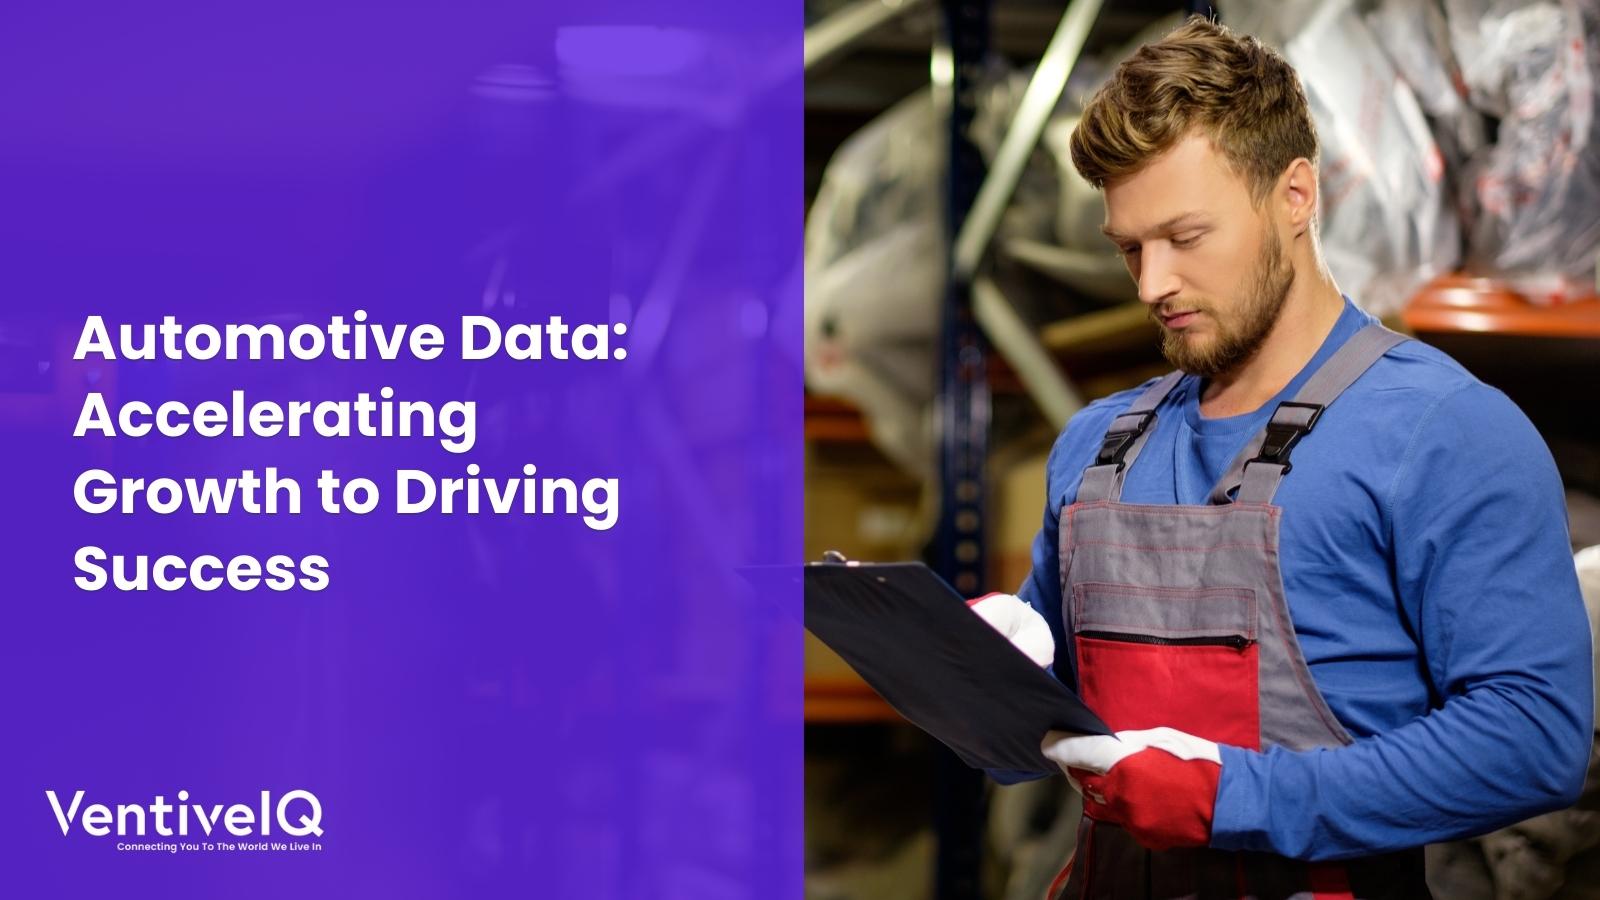 Automotive Data: Accelerating Growth to Driving Success